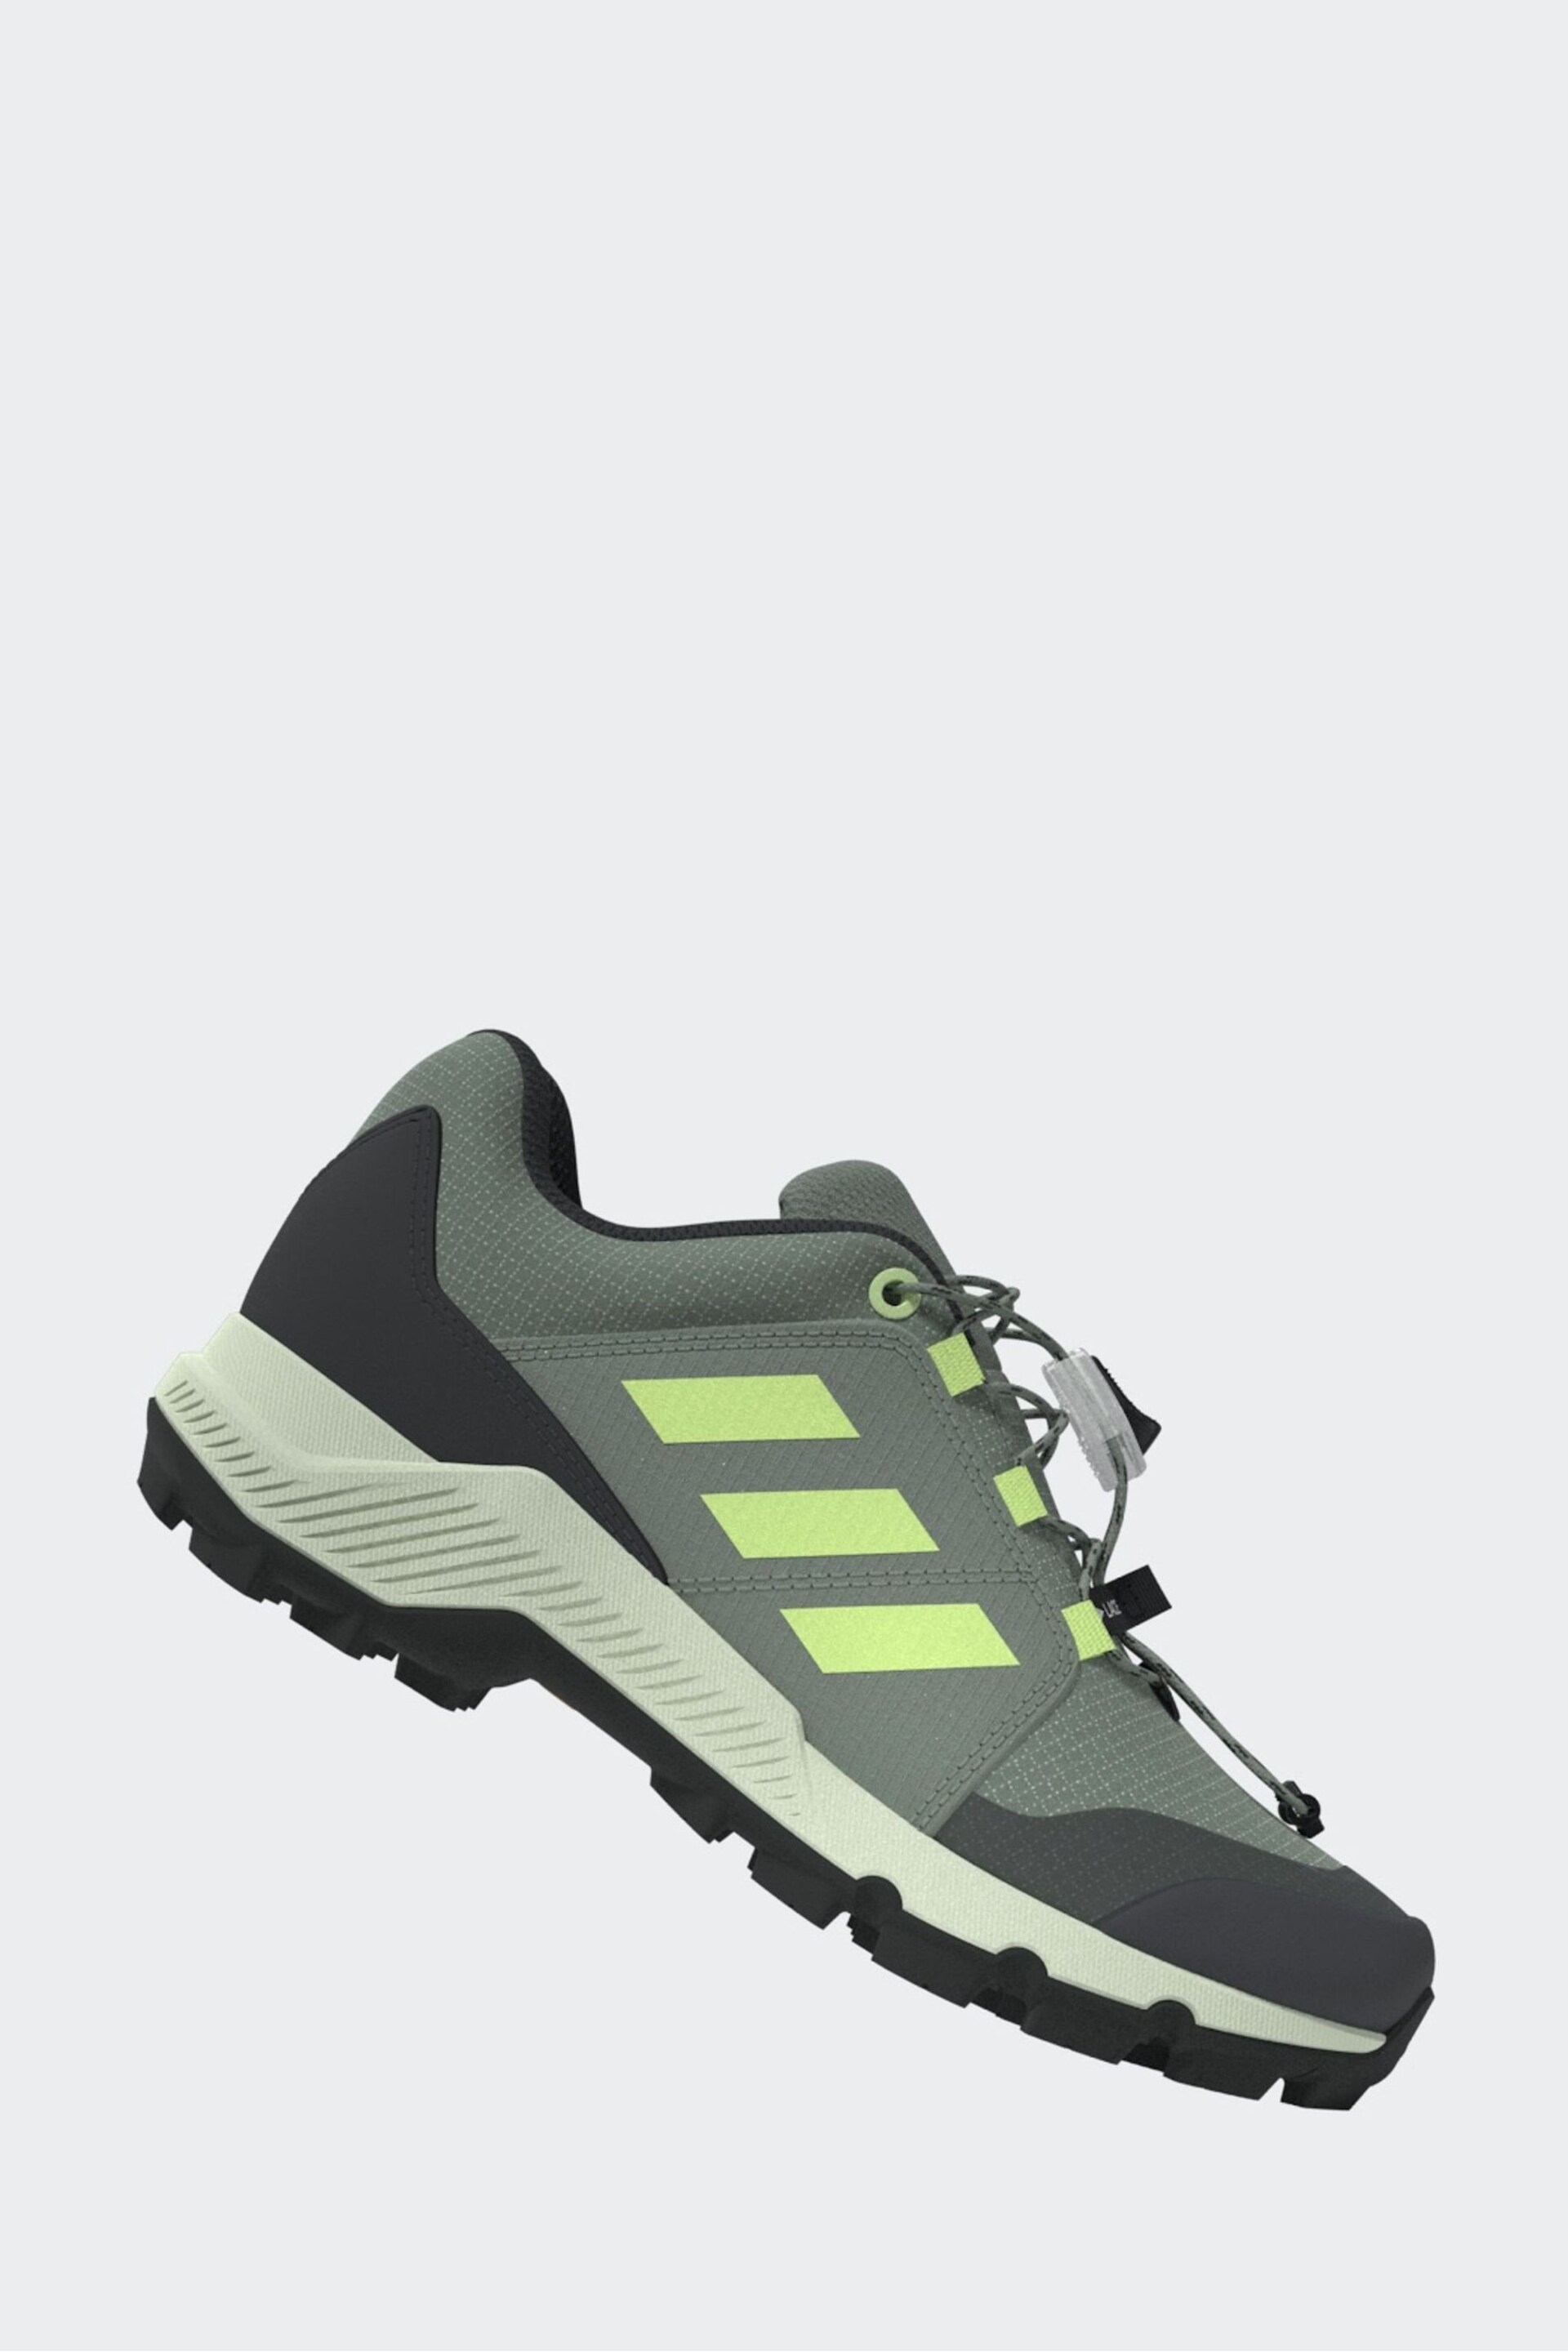 adidas Terrex Gore Tex Hiking Trainers - Image 11 of 17